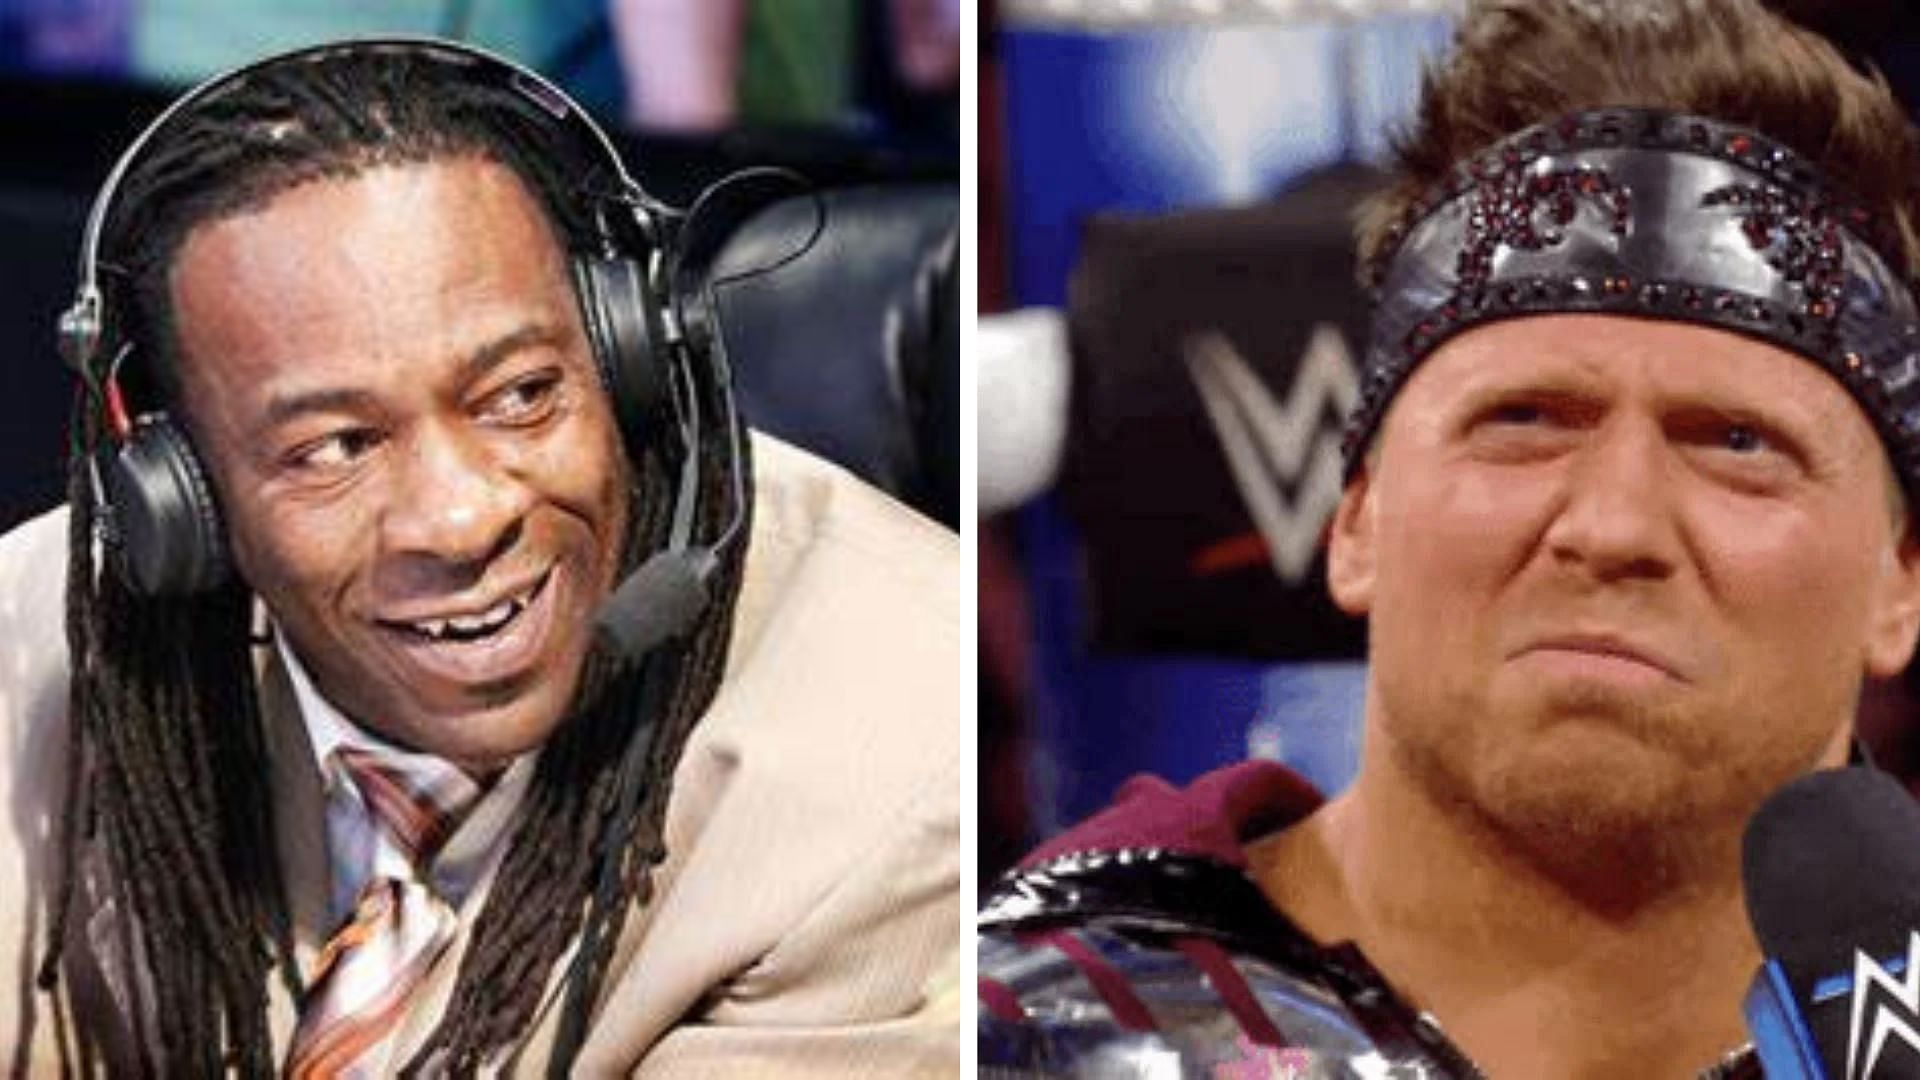 Booker T on the left, The Miz on the right